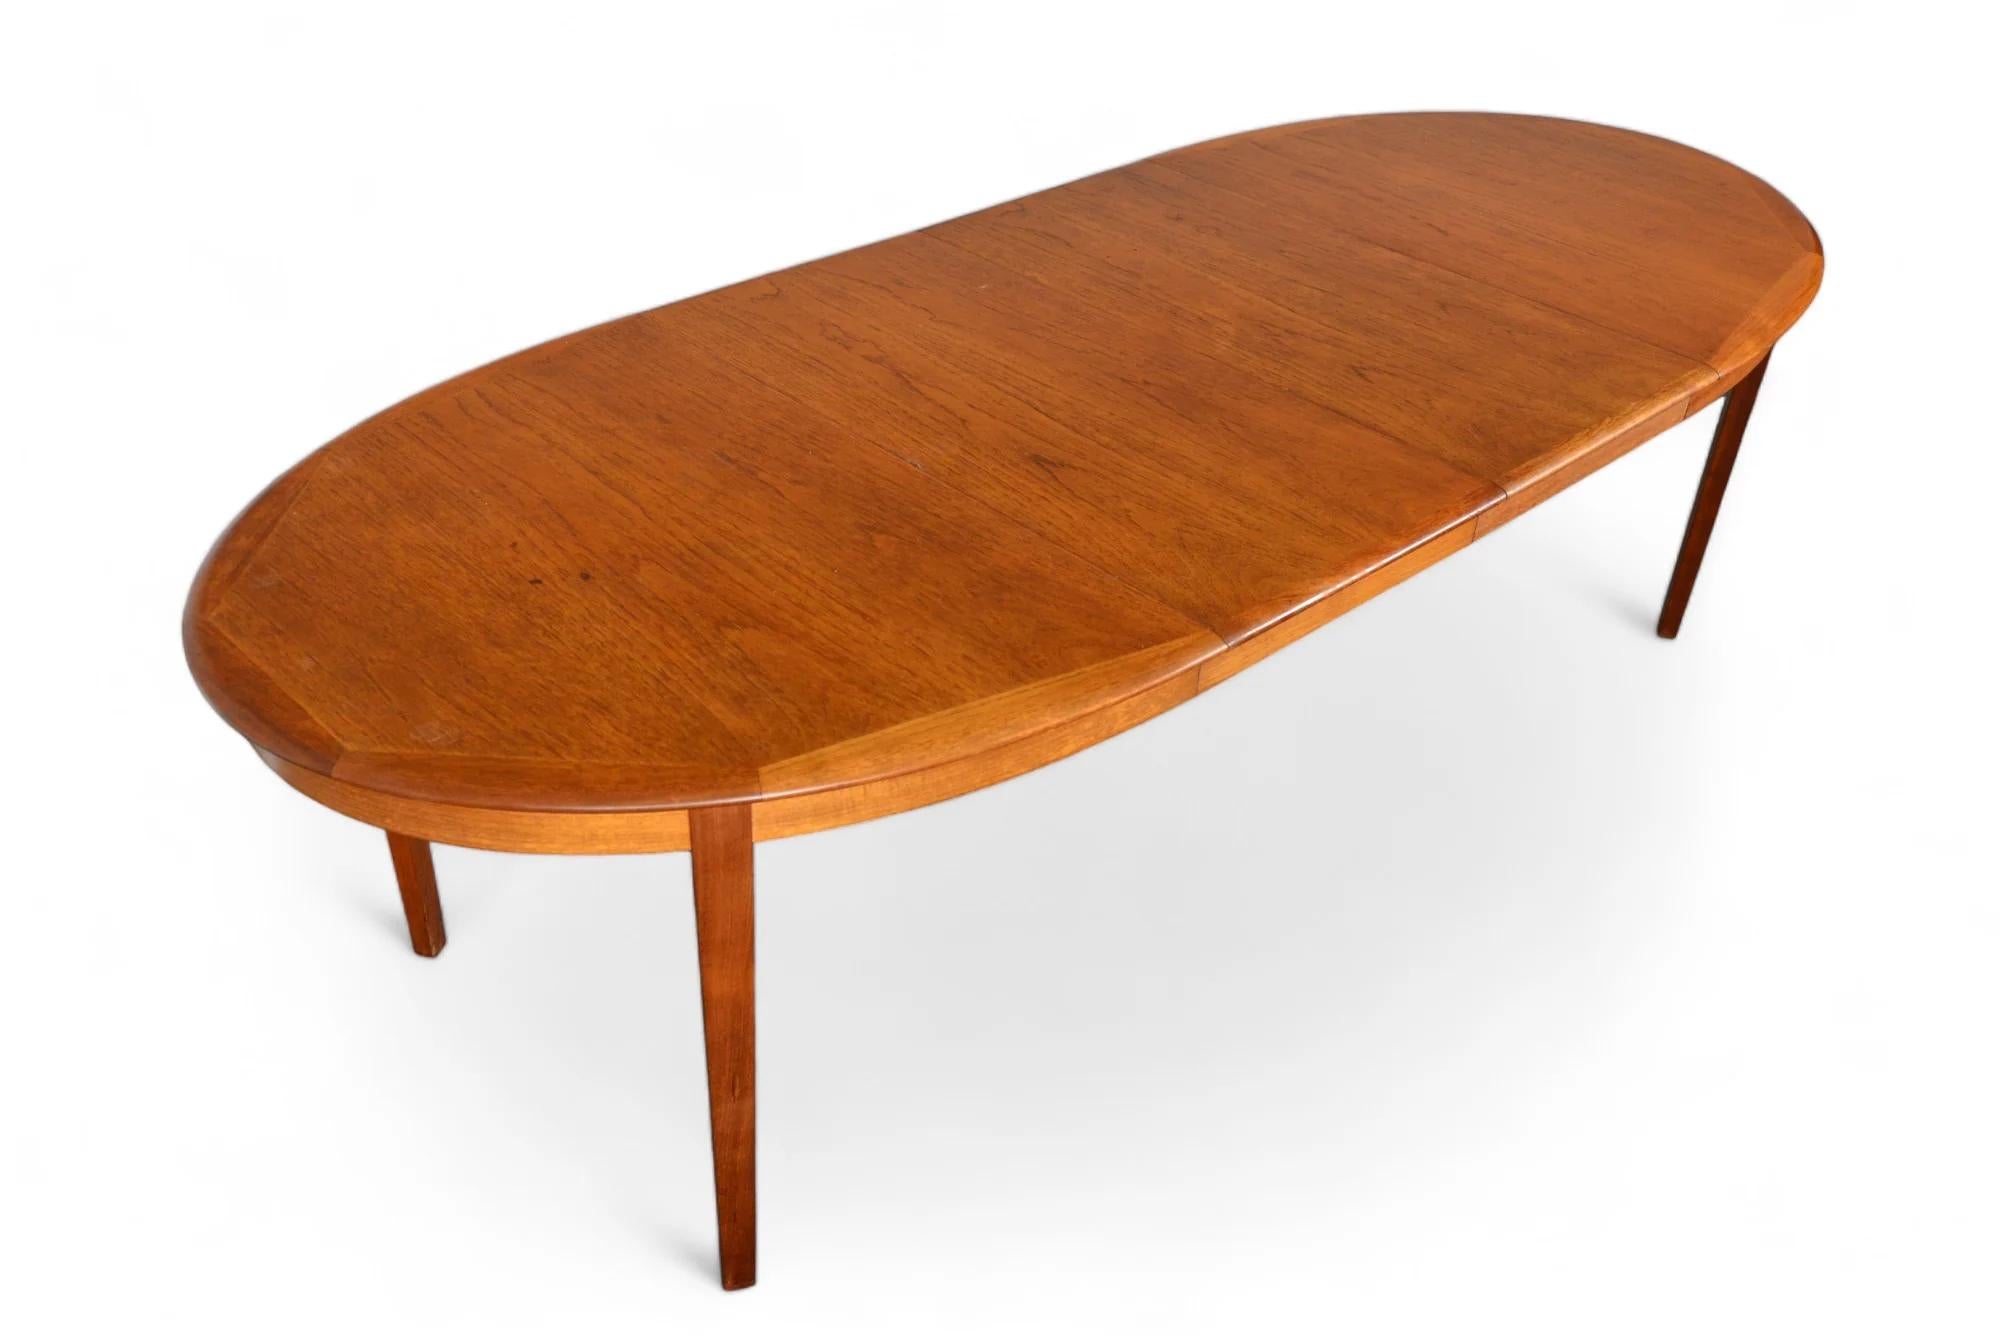 Danish Modern Oval Teak Dining Table + Two Leaves By Byrlund For Sale 4